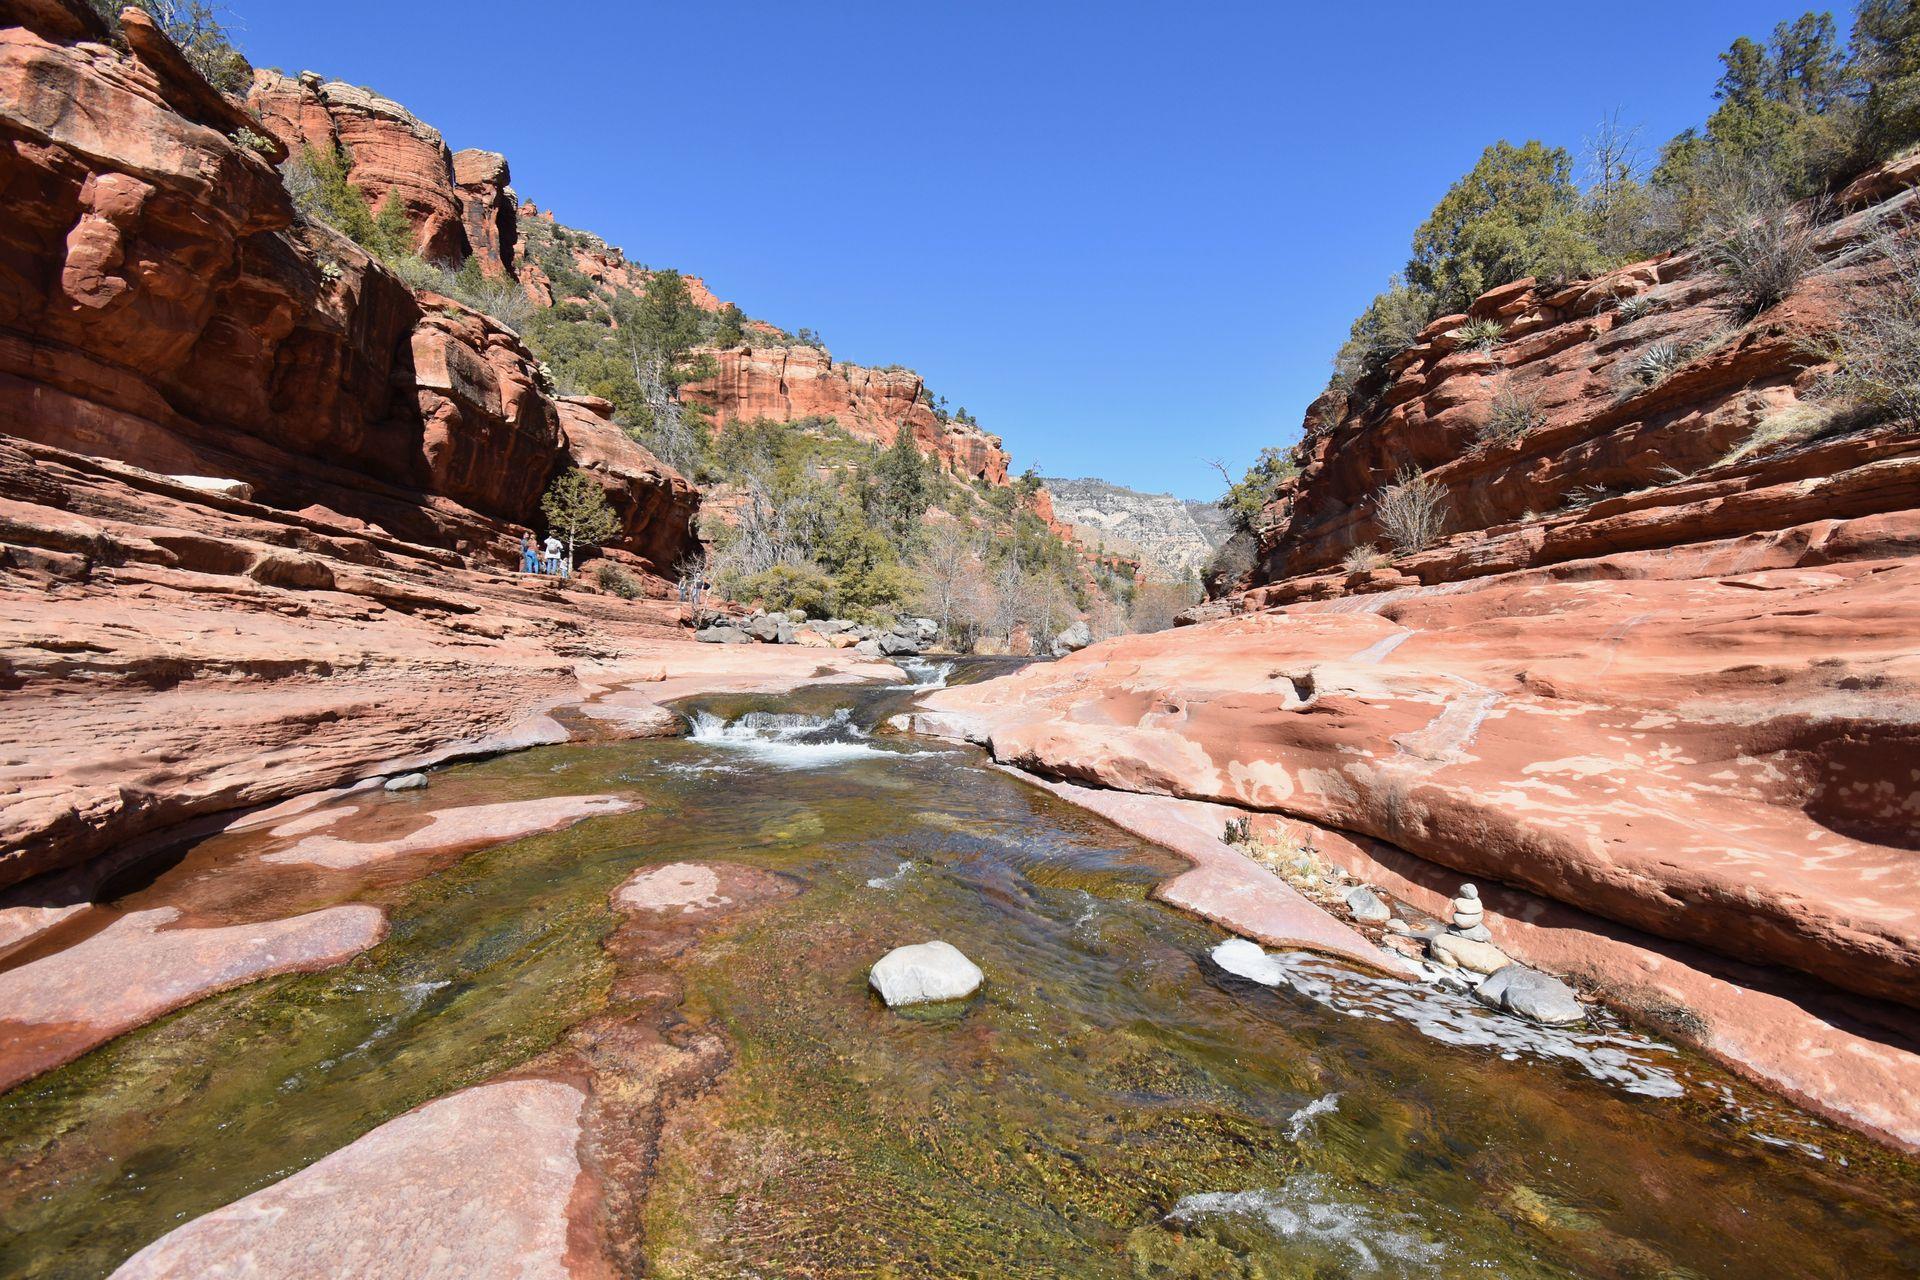 A stream of water flowing through an orange rock canyon at Slide Rock Park.